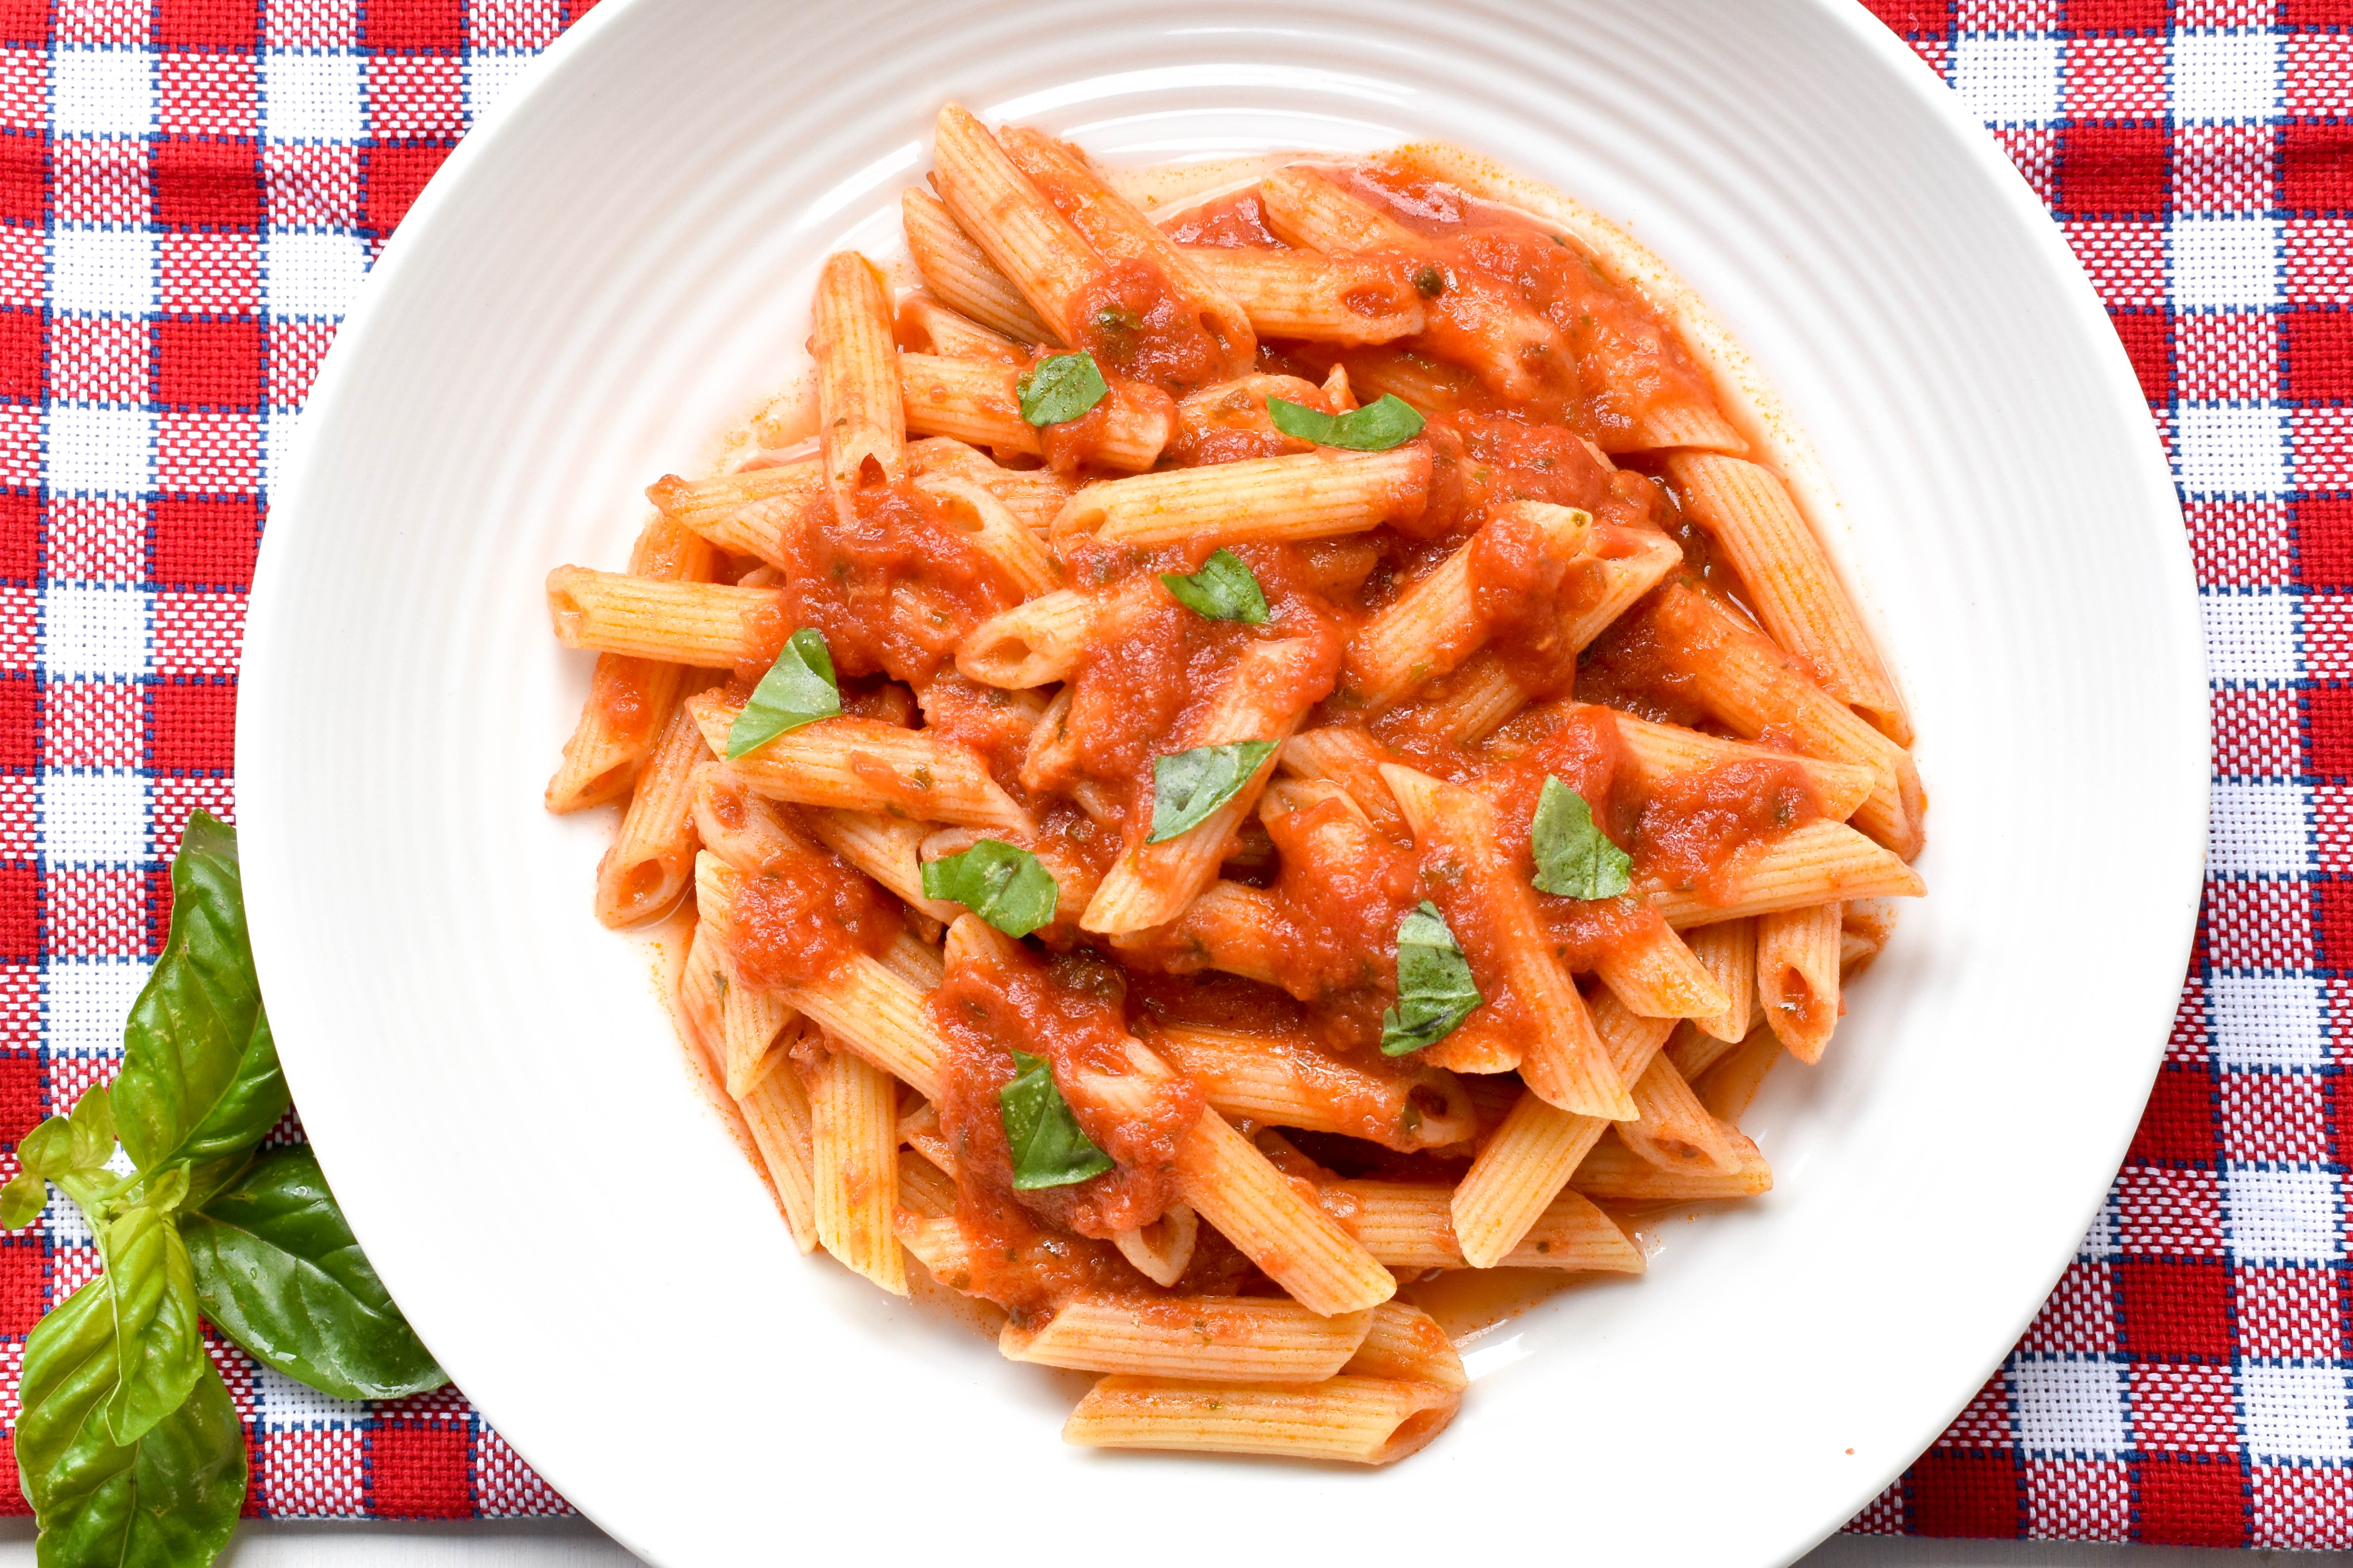 Top 10 must try classic Italian pastas to celebrate World Pasta Day 25 October 2019